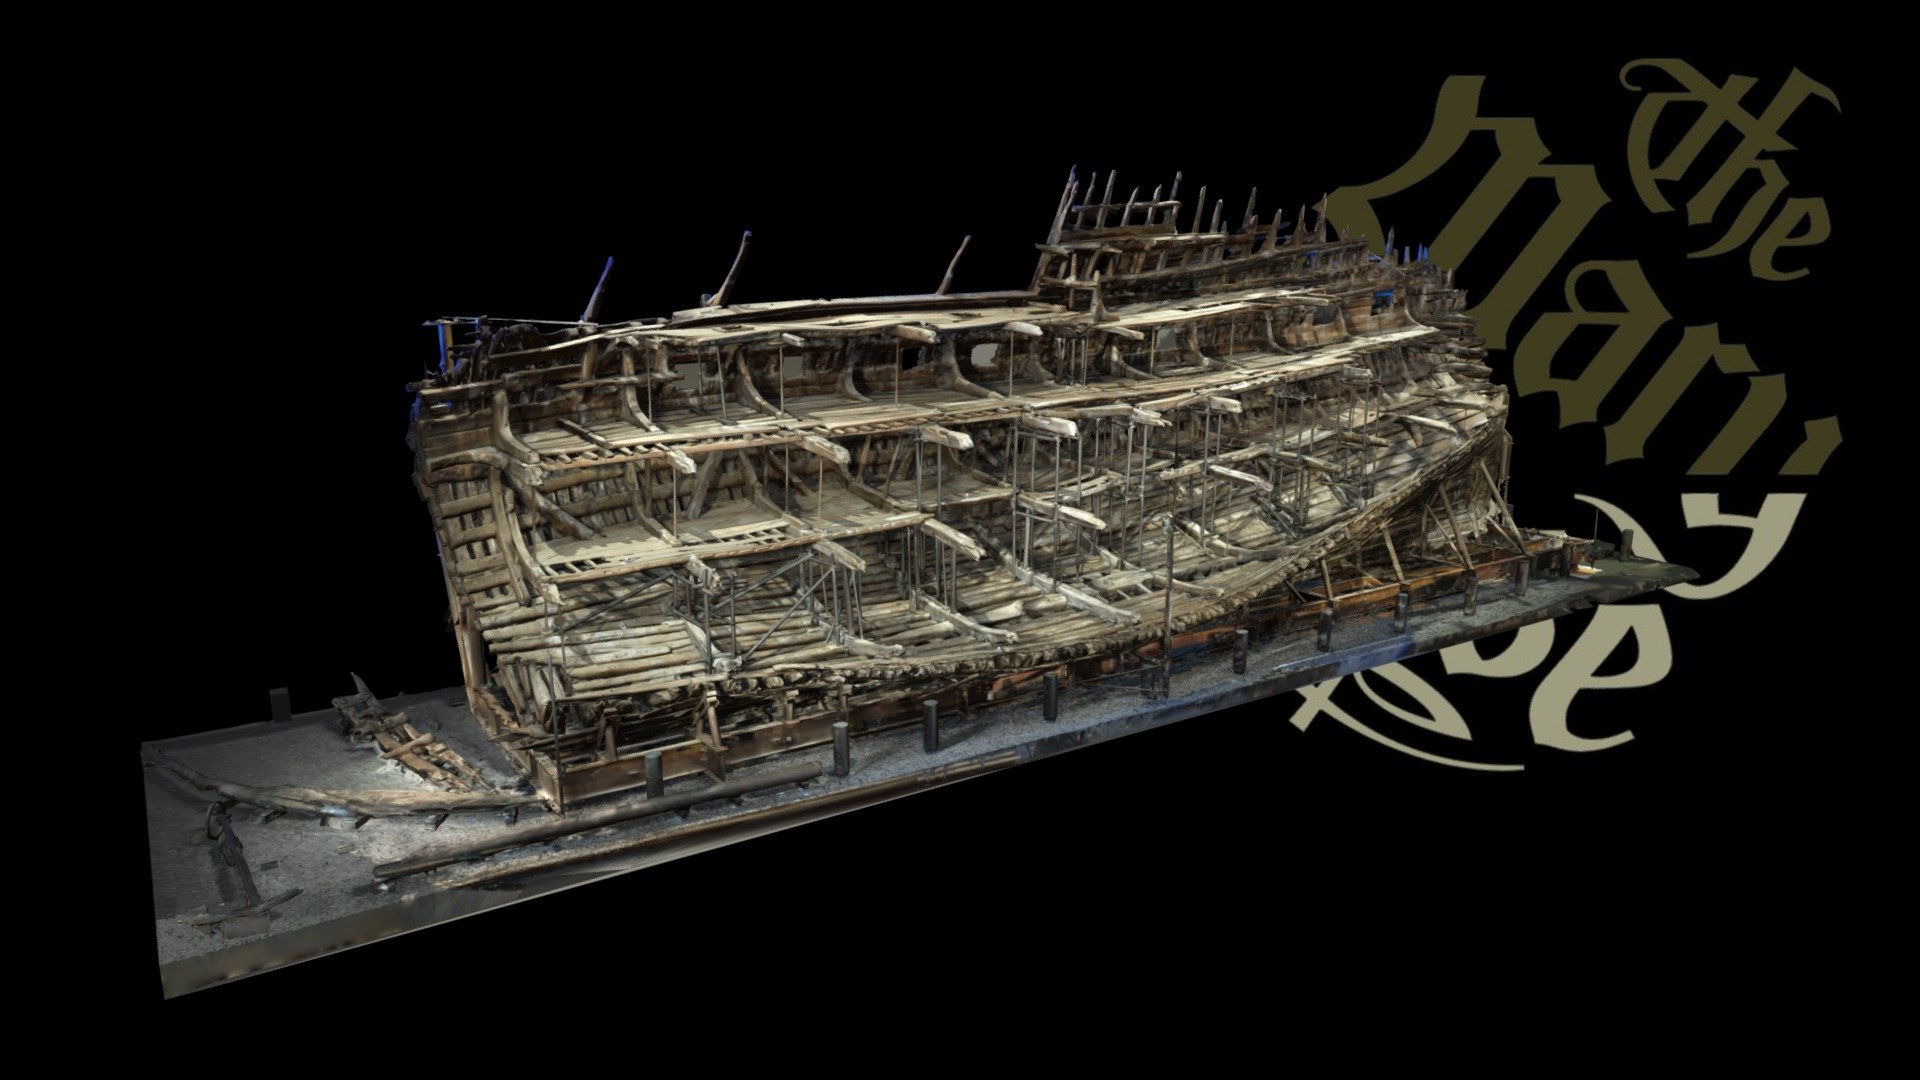 3D Artefacts from the Mary Rose | The Mary Rose